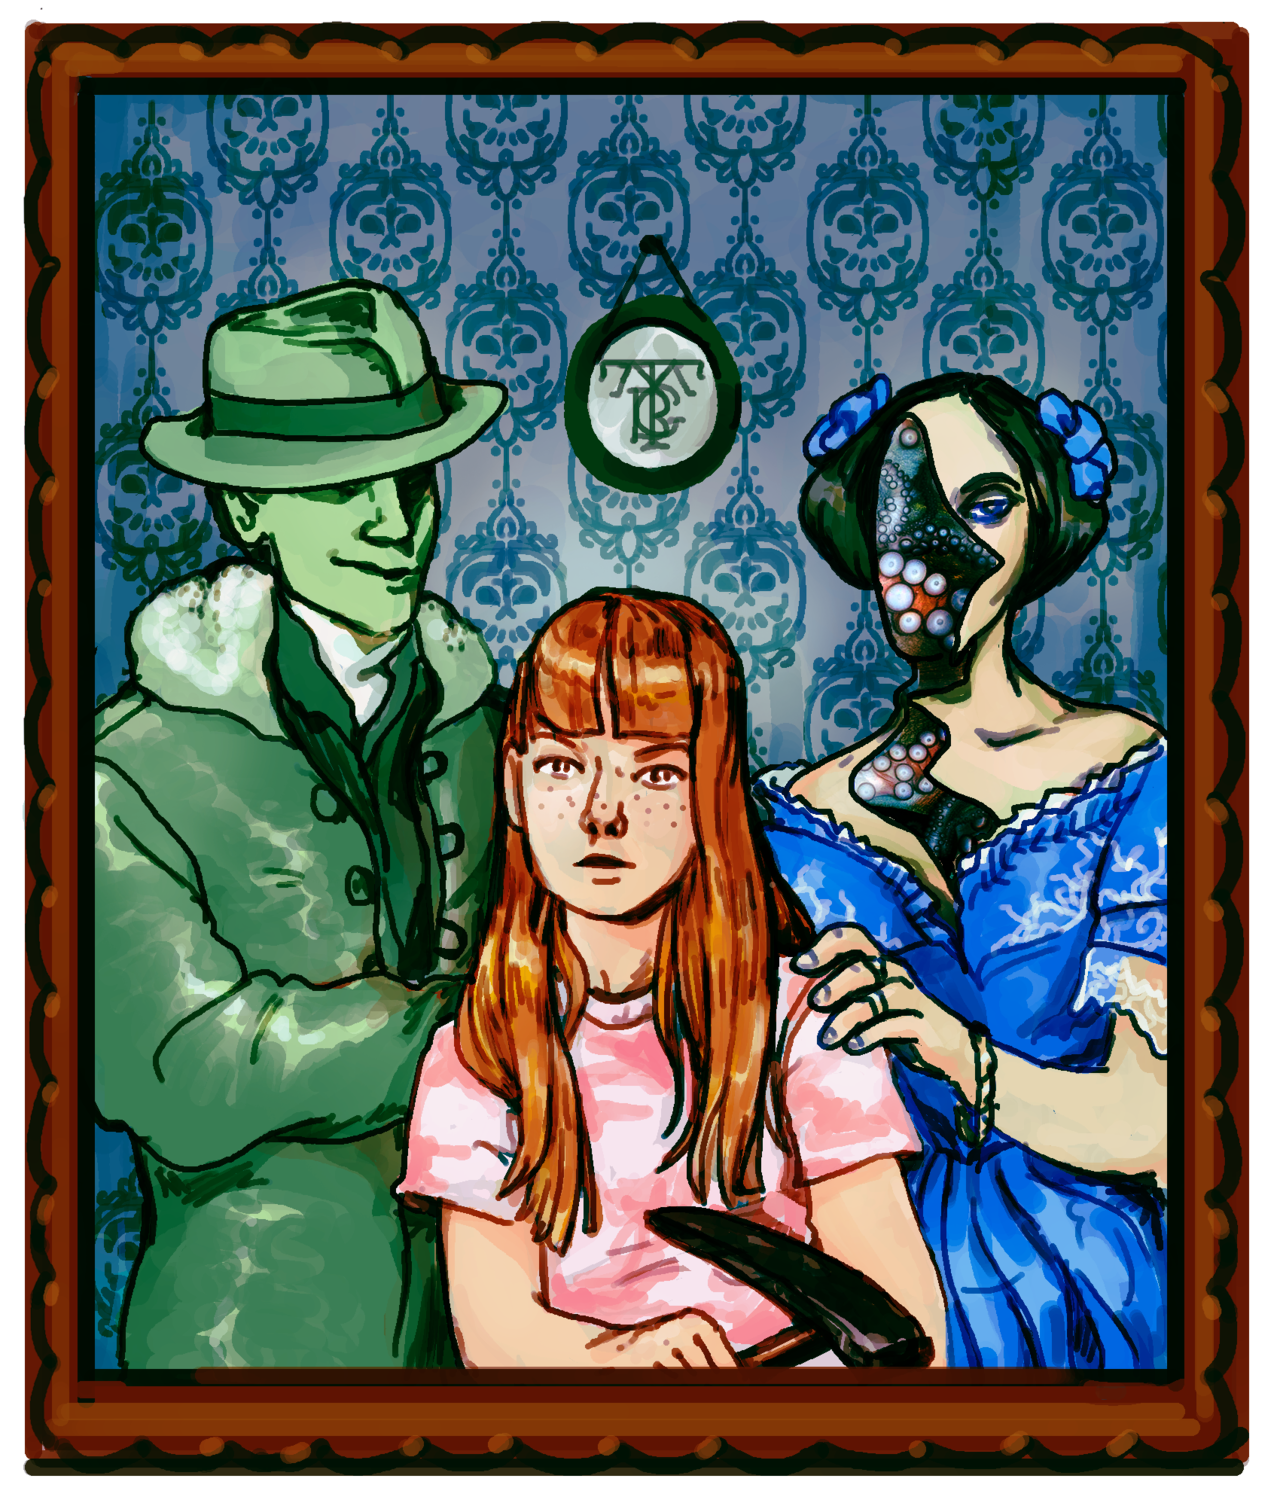 The man from the Flood cover, the woman from the Nanobots, and the girl from John Henry pose as if for a family photo.